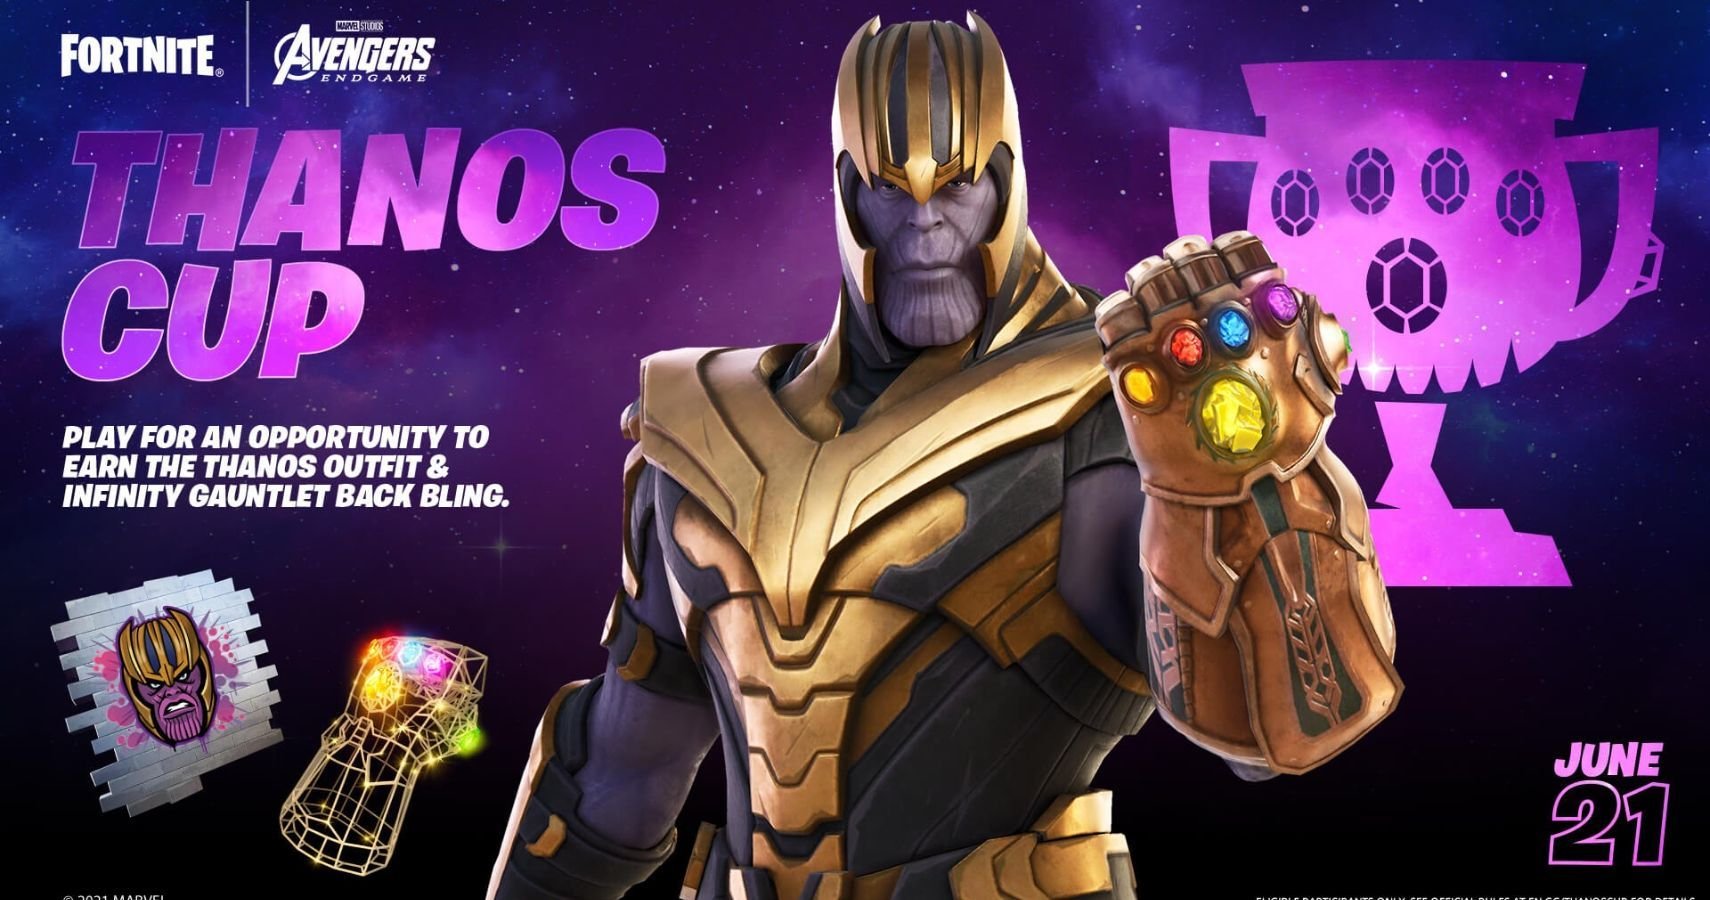 Fortnite Thanos Cup Begins On June 21, Rewards Include Thanos Outfit and Back Bling